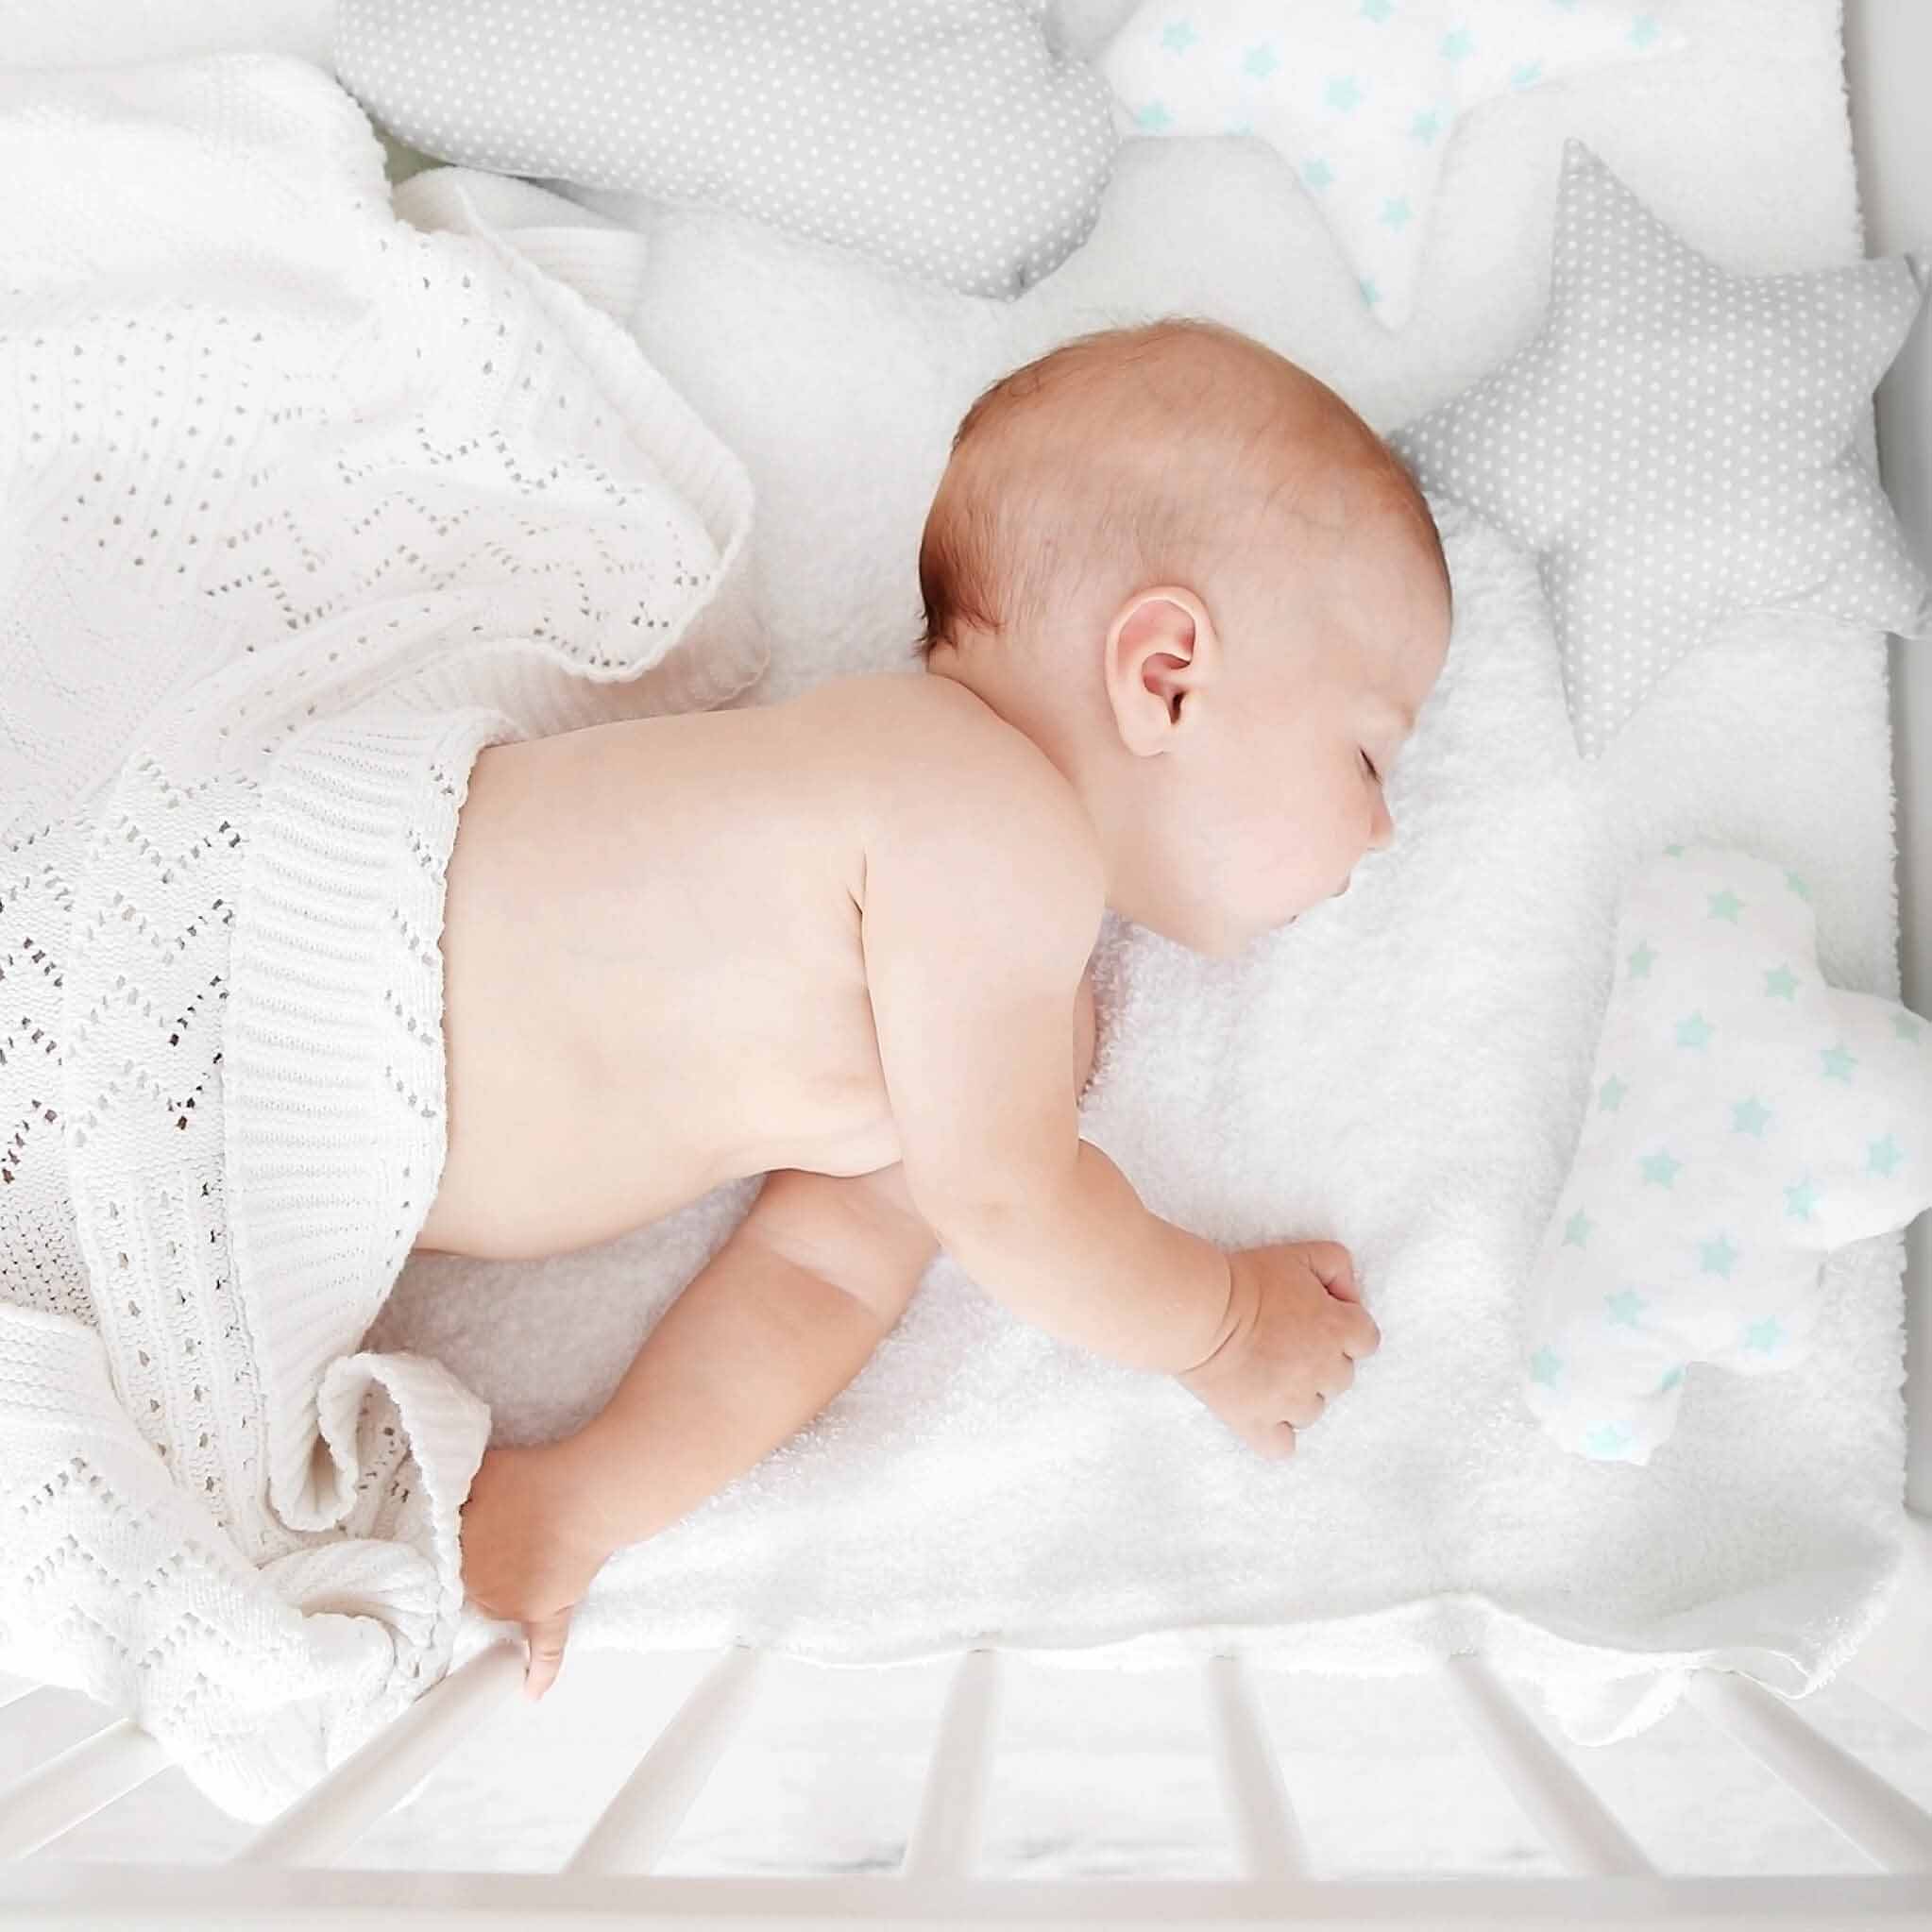 Babies are happy when they are comfortable and dry. We have you covered (and their bedding) with our selection of mattress covers and waterproof pads.